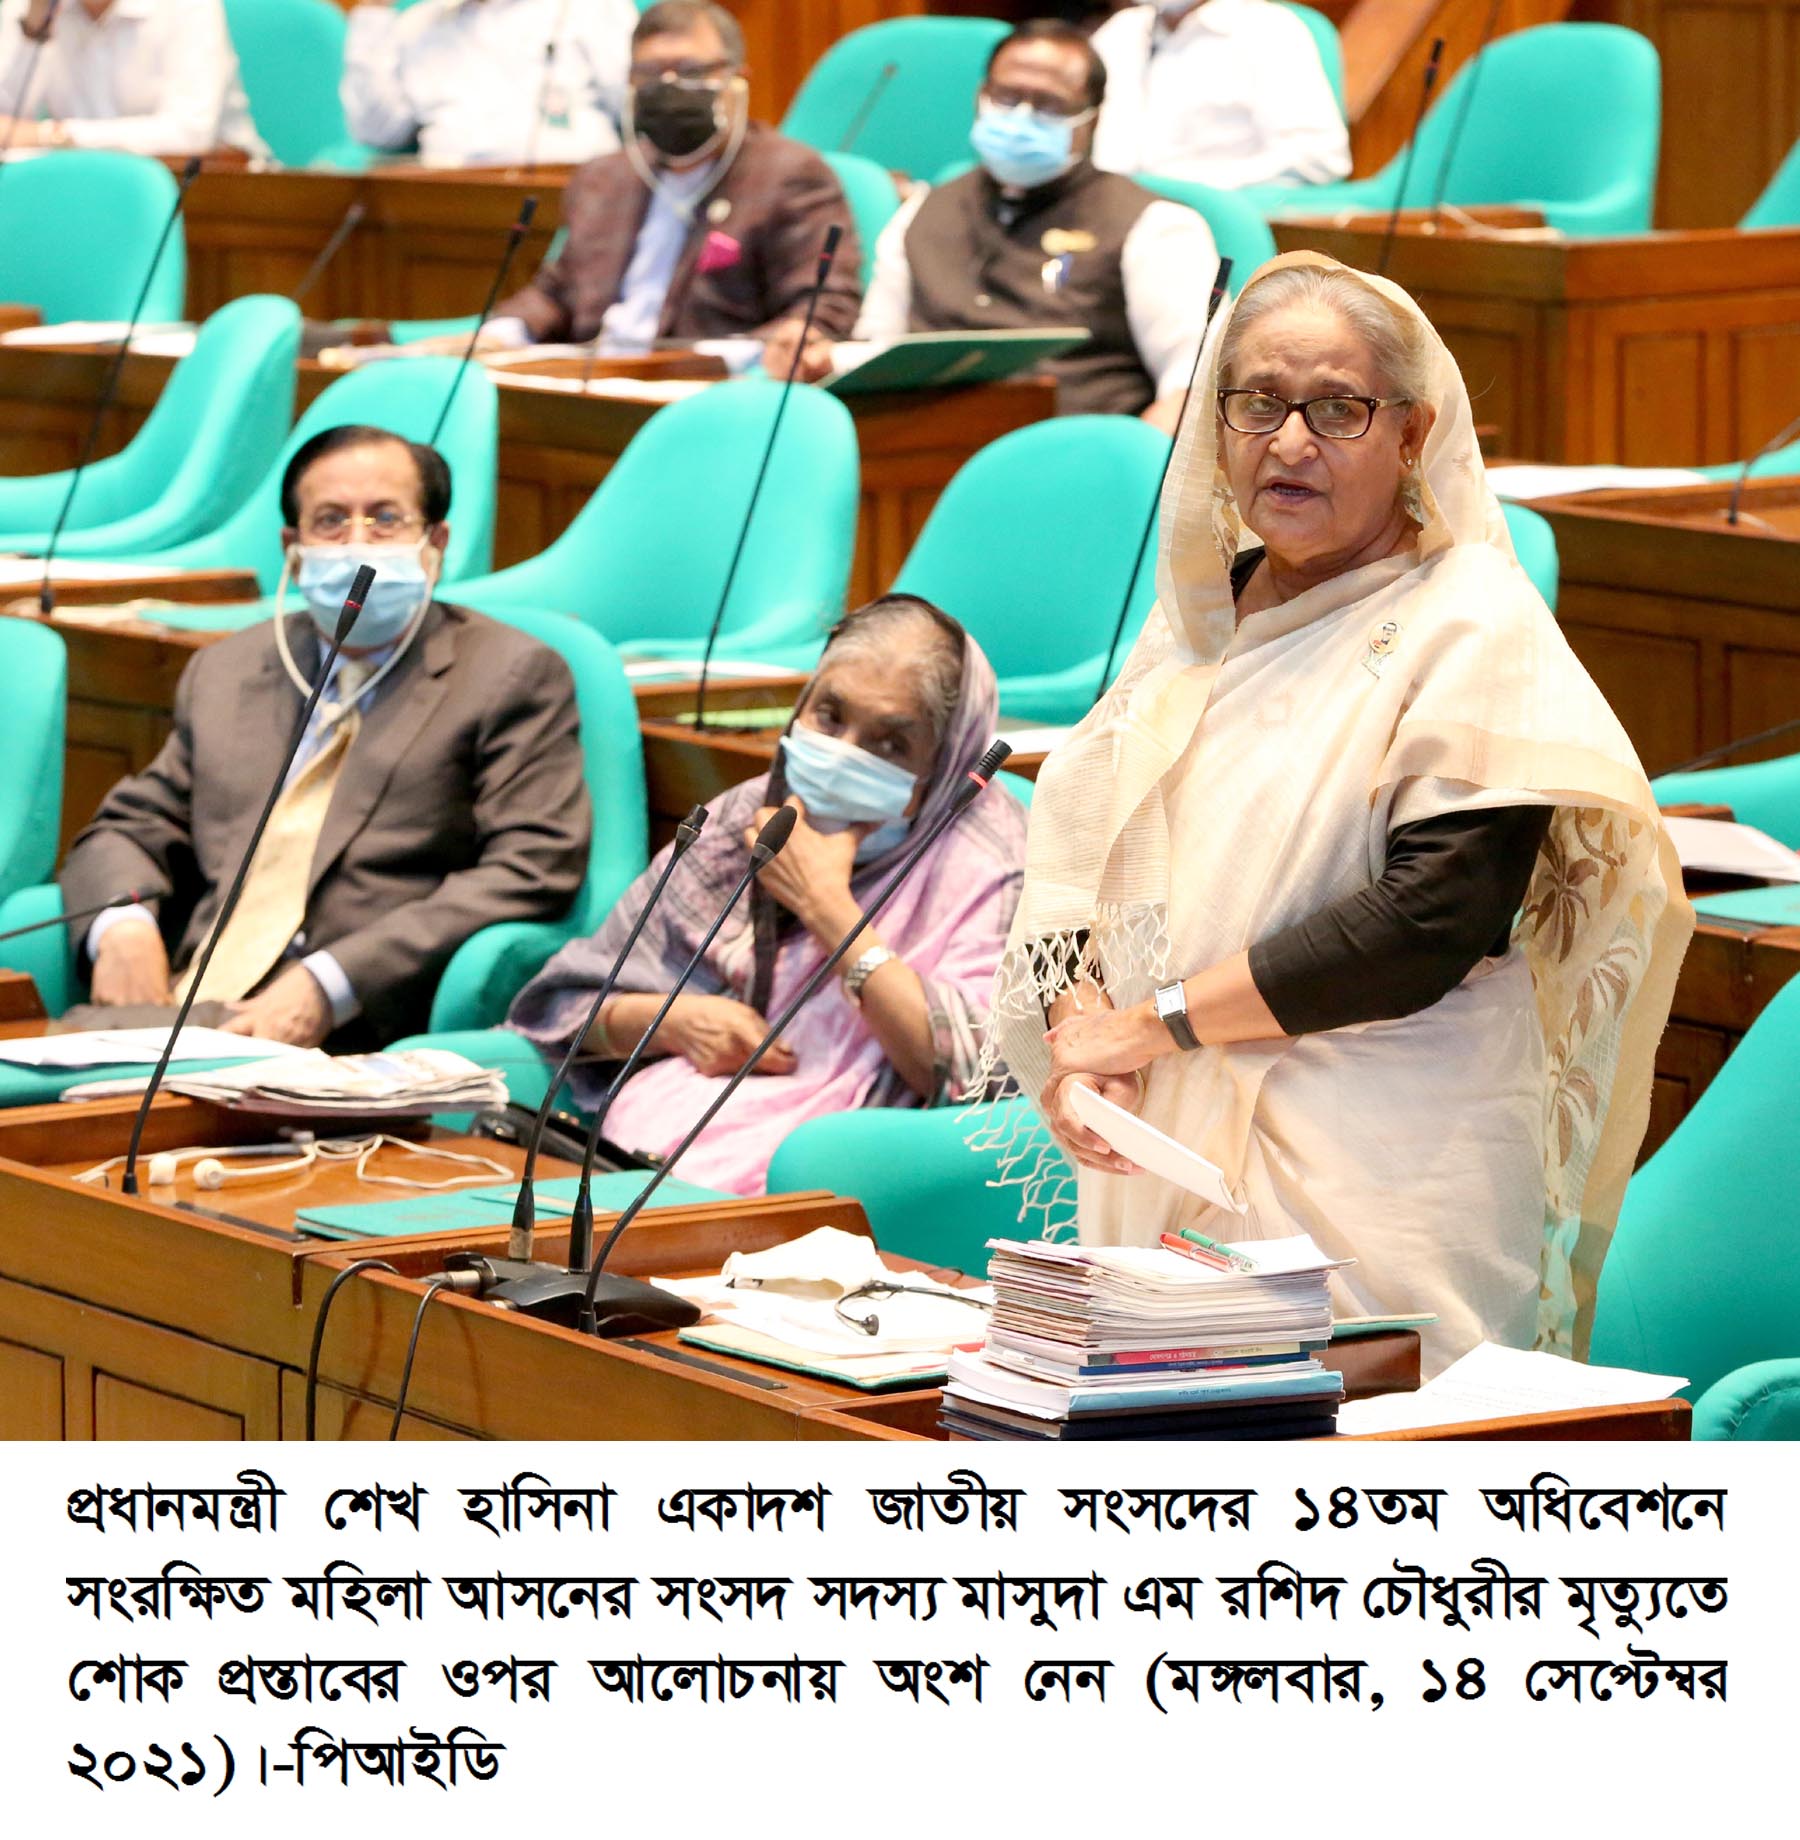 PM Sheikh Hasina attends special event